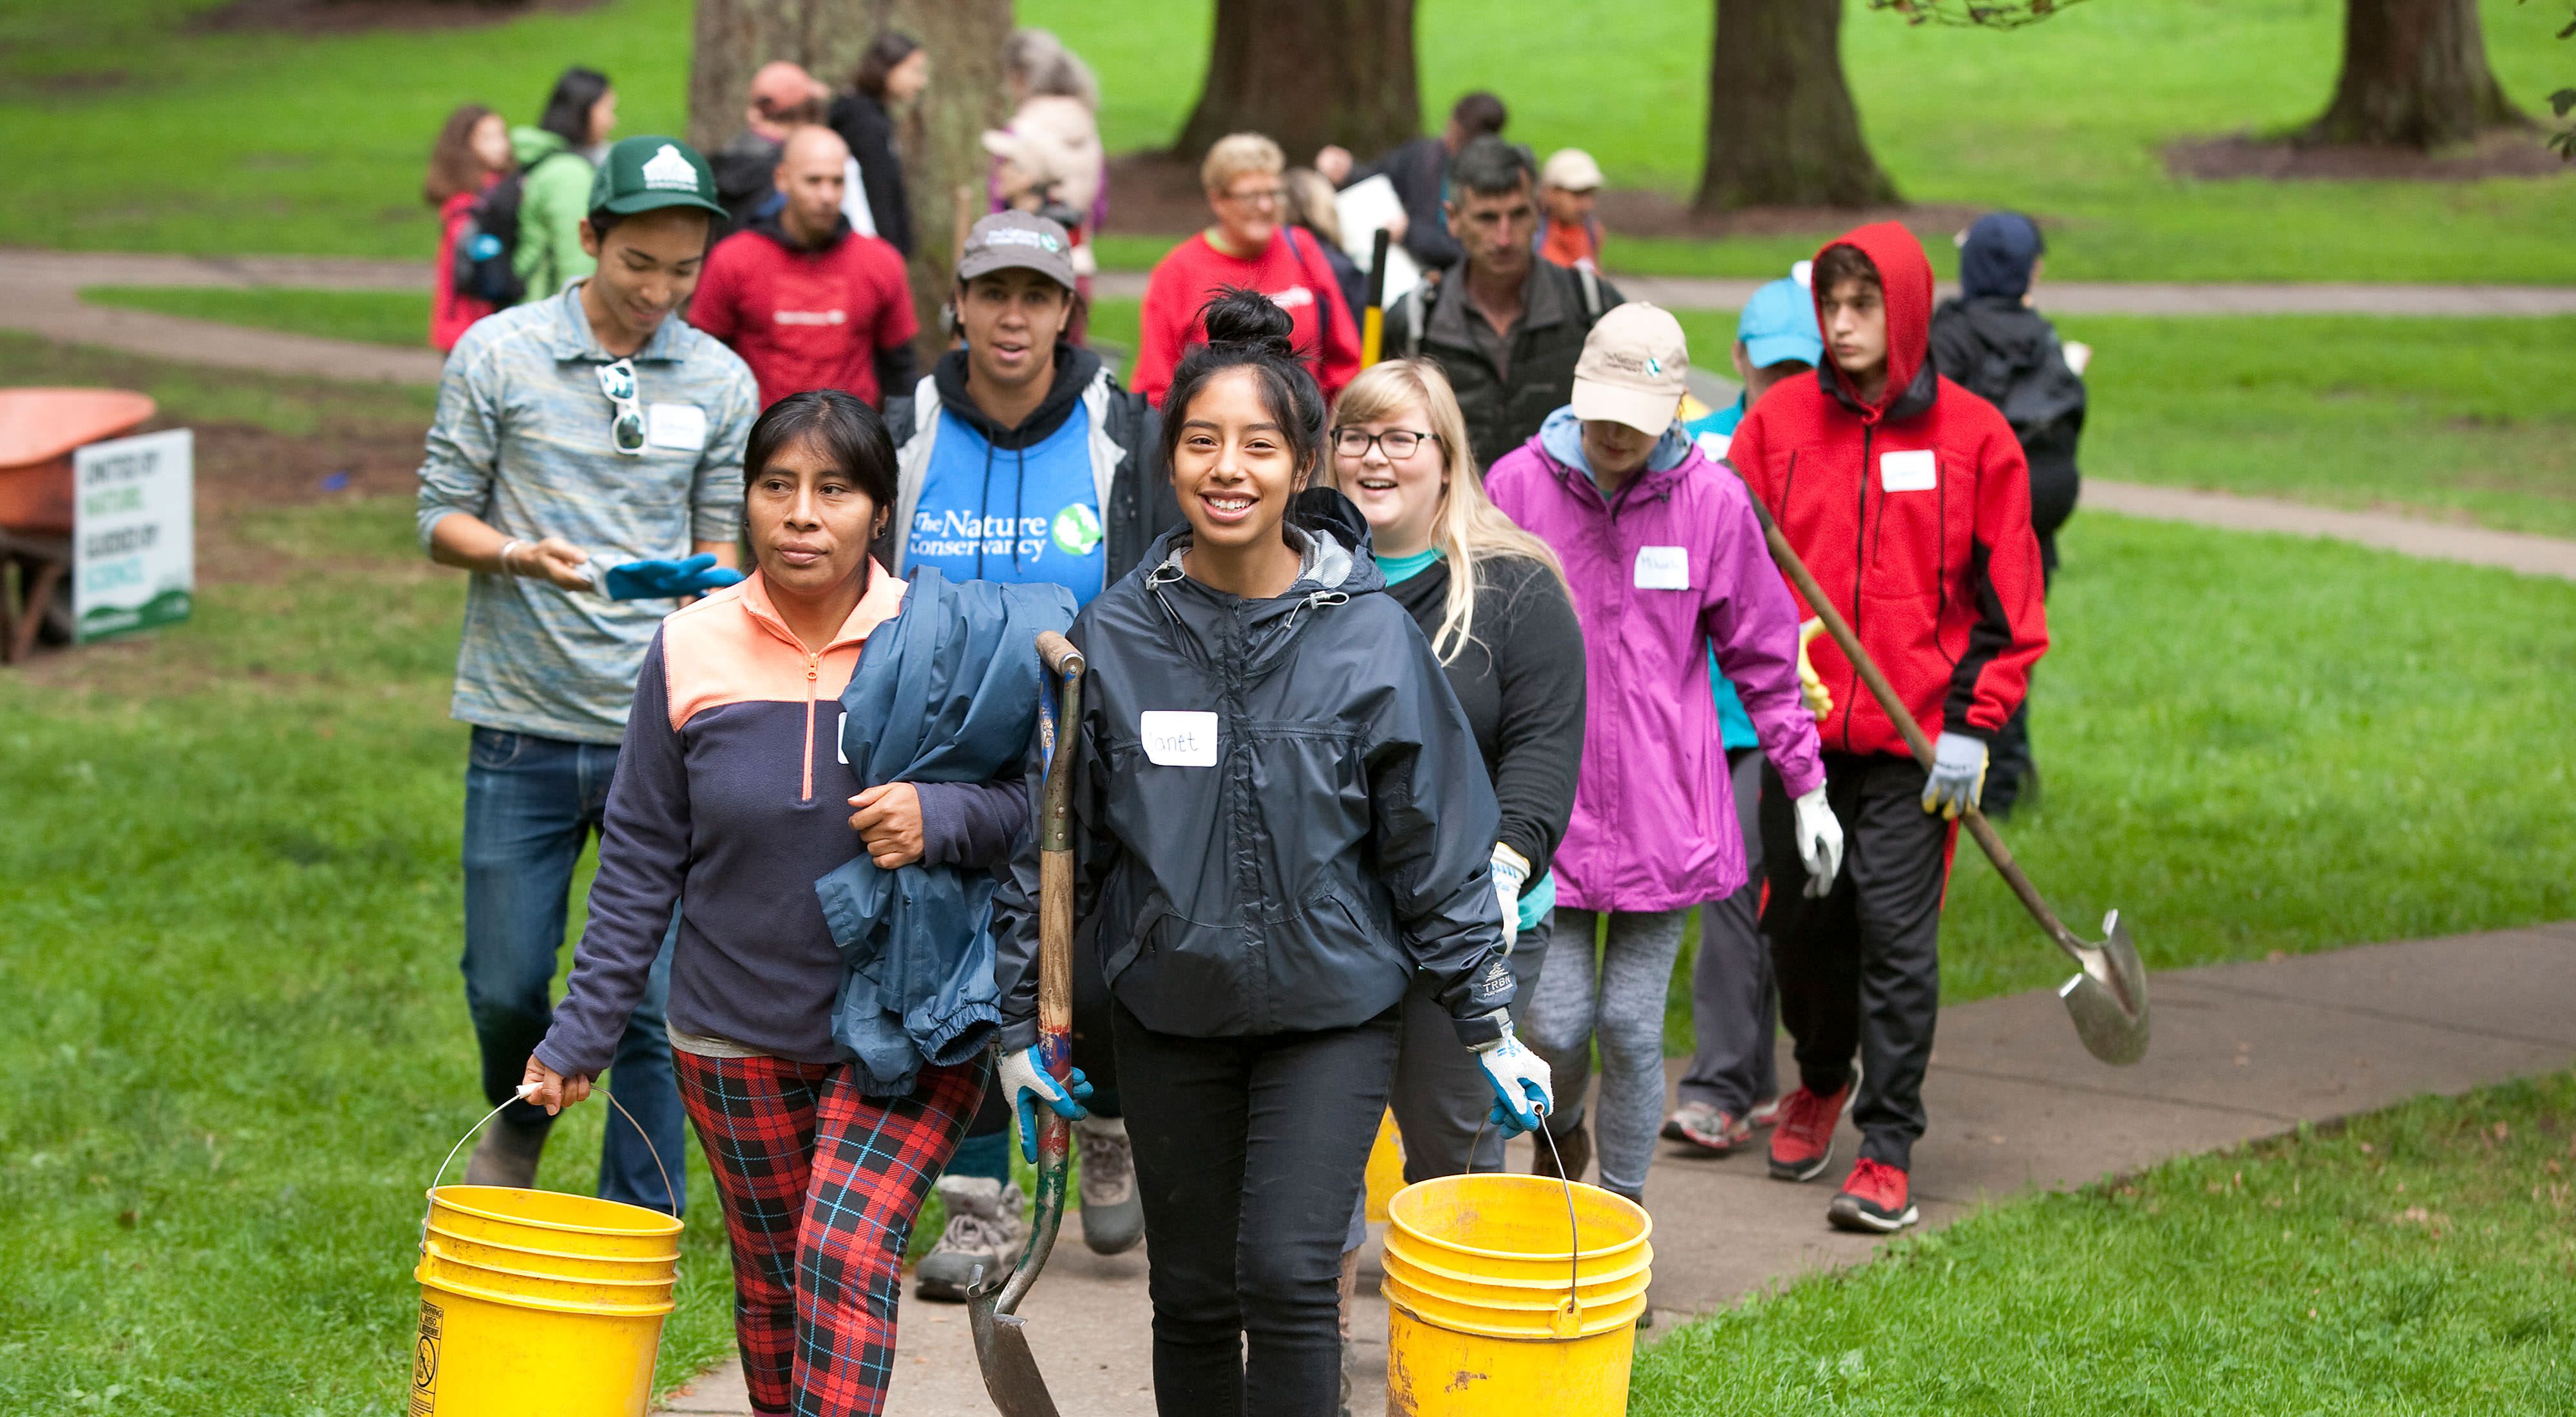 The Nature Conservancy's Mt. Tabor volunteer event on September 30, 2017, in Portland, Oregon.